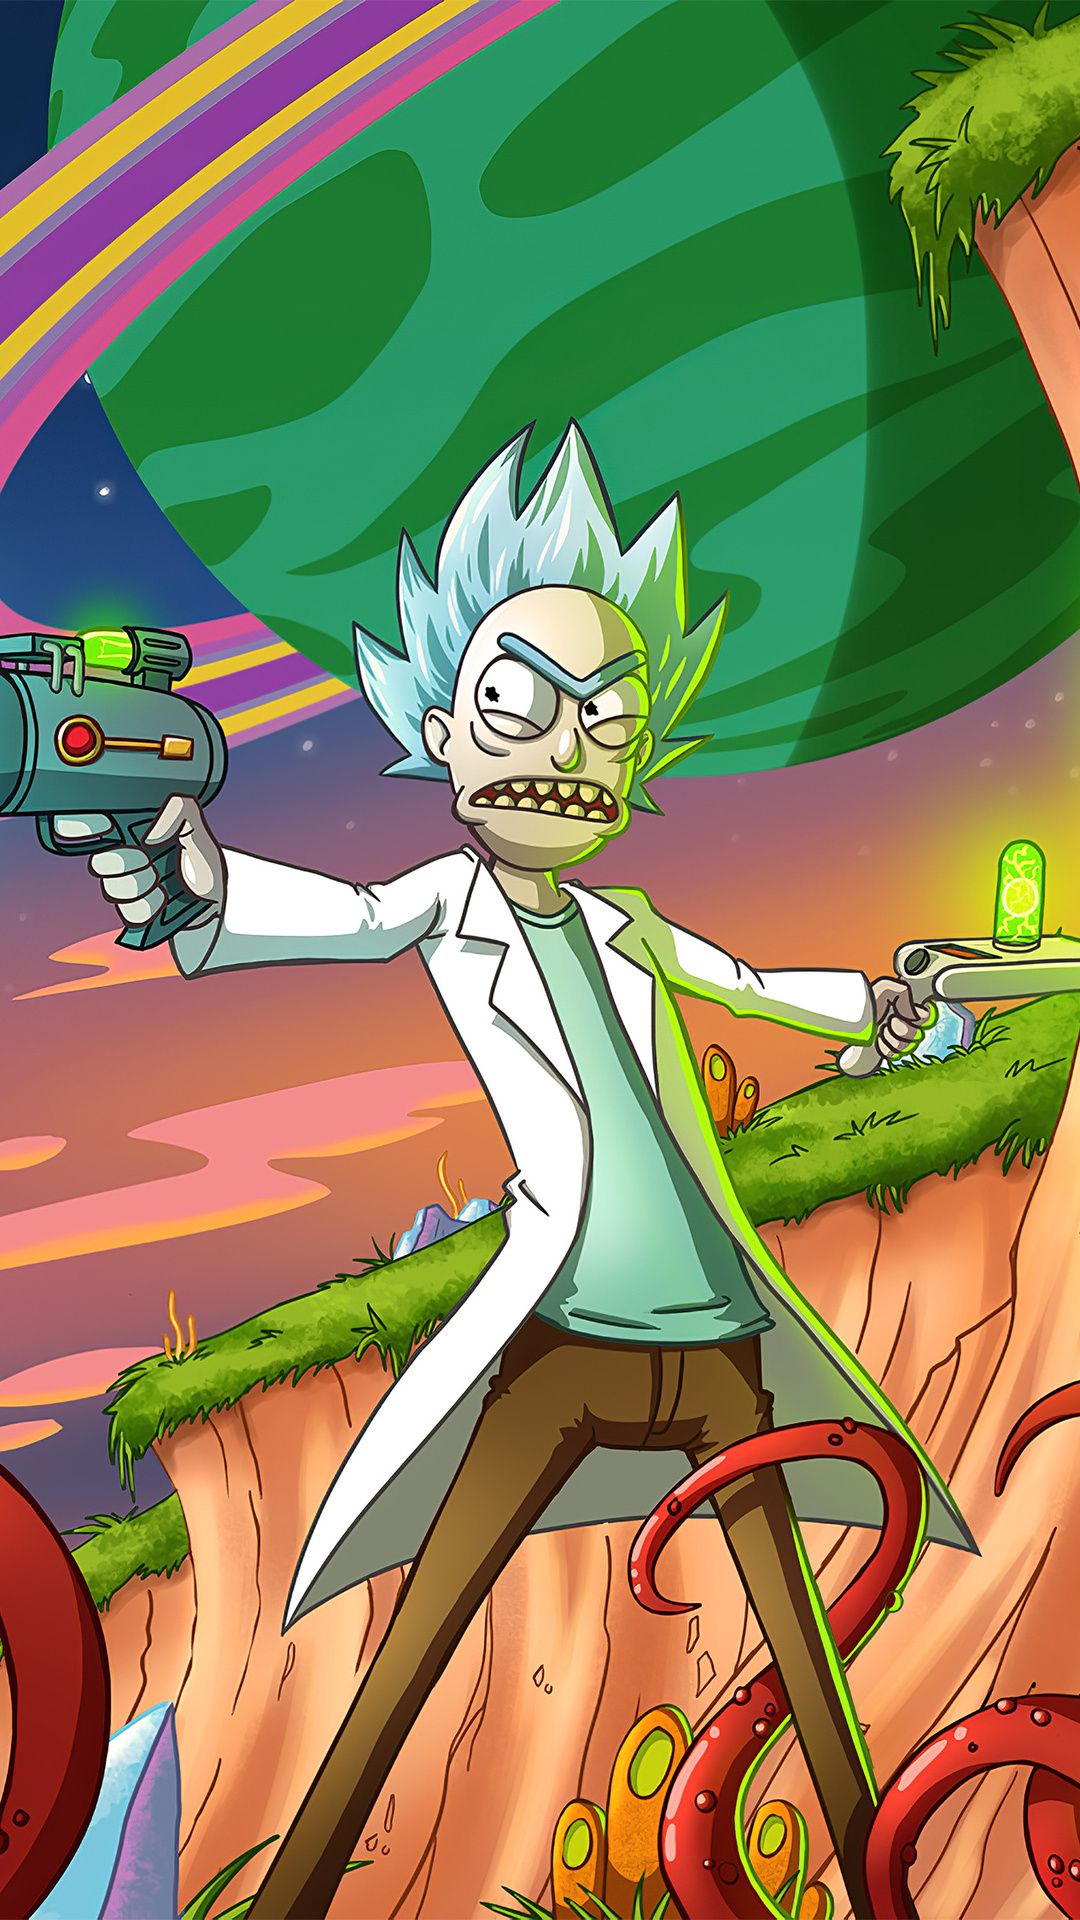 Galaxy Rick And Morty Wallpapers